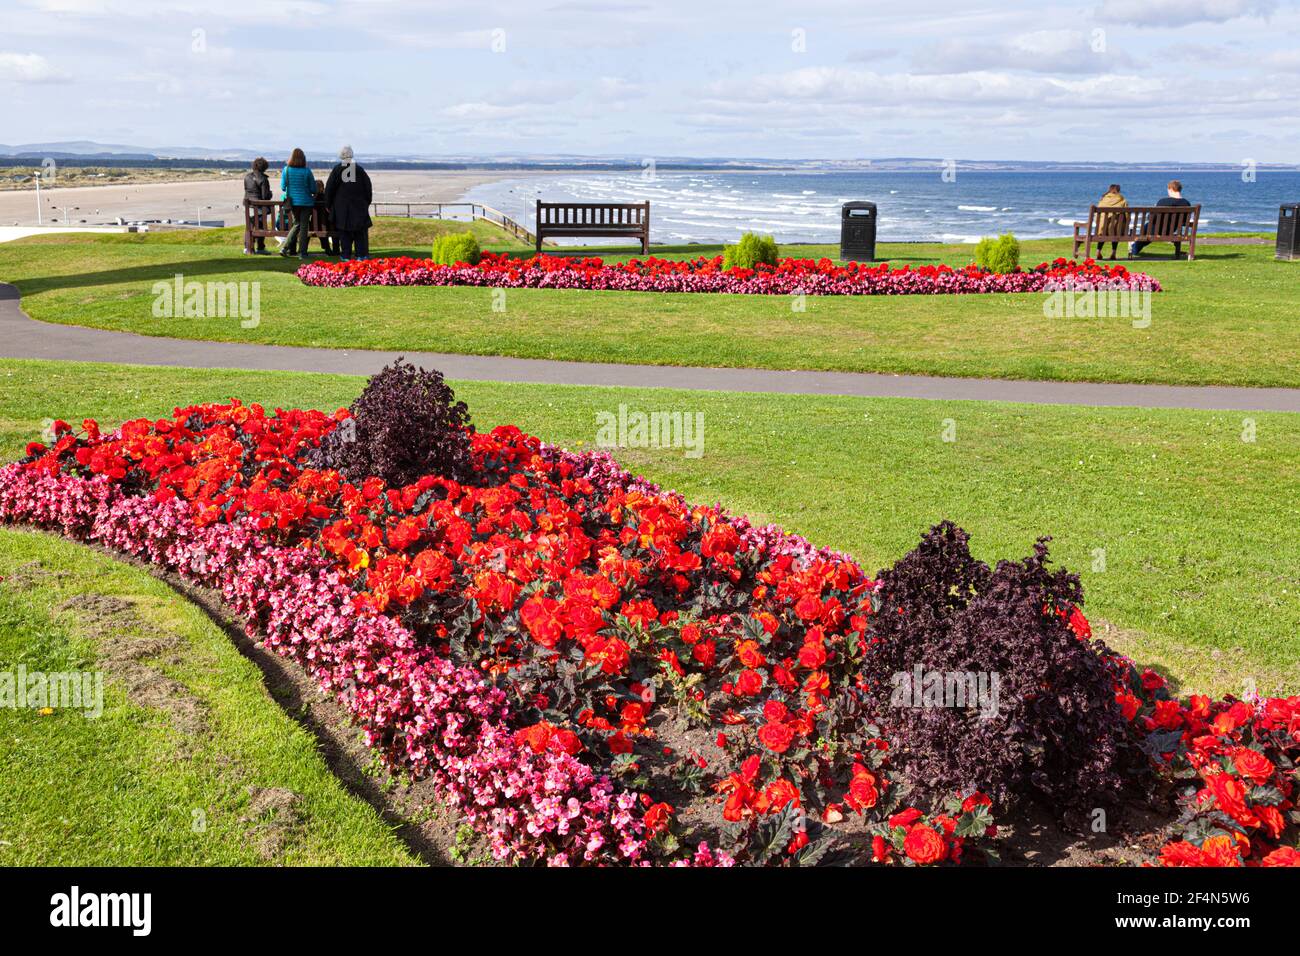 Floral displays on the seafront at St Andrews, Fife, Scotland UK Stock Photo